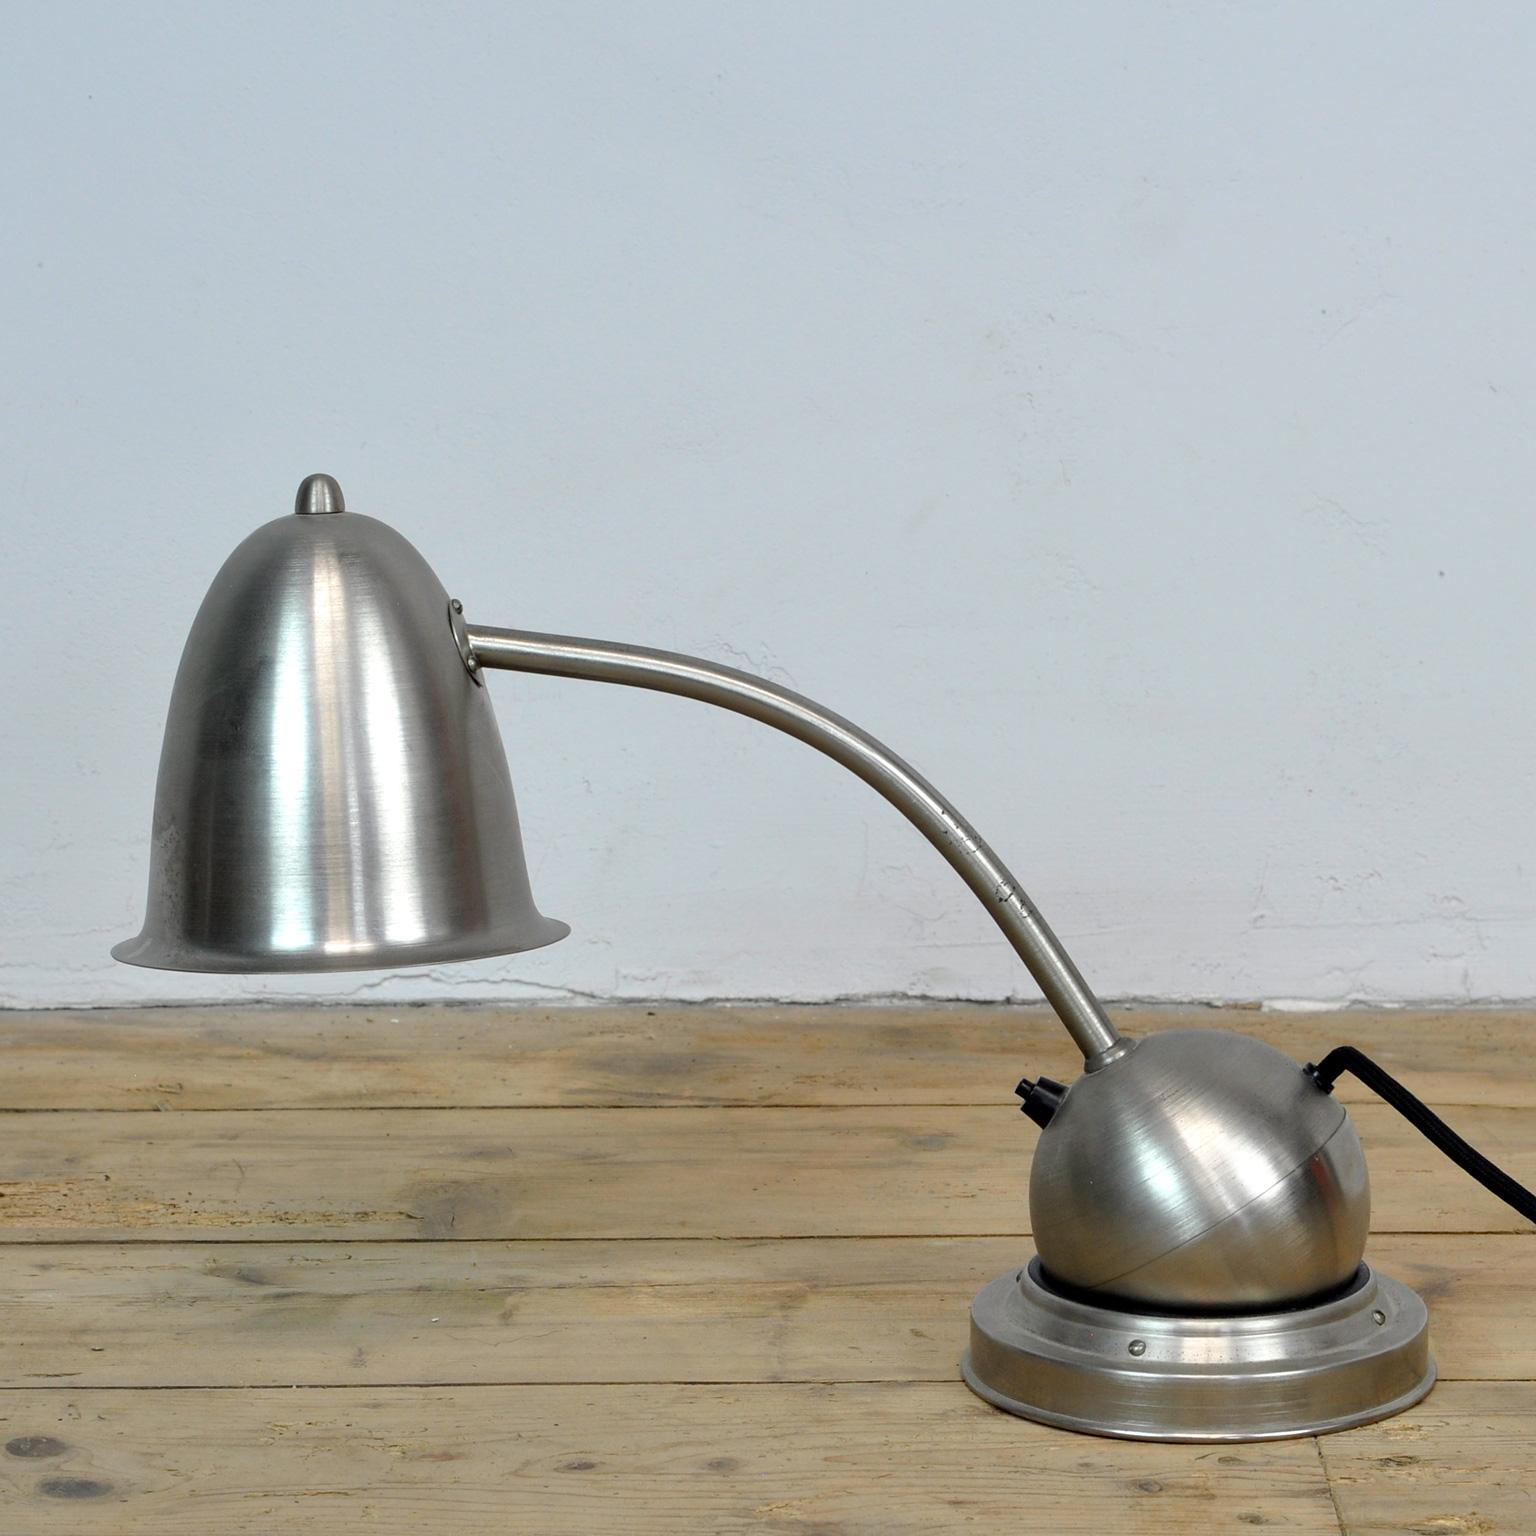 Rare nickel-plated desk lamp, ca 1930.
The lamp is called tumbler, in Dutch it is called tuimelaar/duikelaar.
The shade can be adjusted into different positions, as the counterweight of the ball keeps the lamp in balance. The lamp rests on a